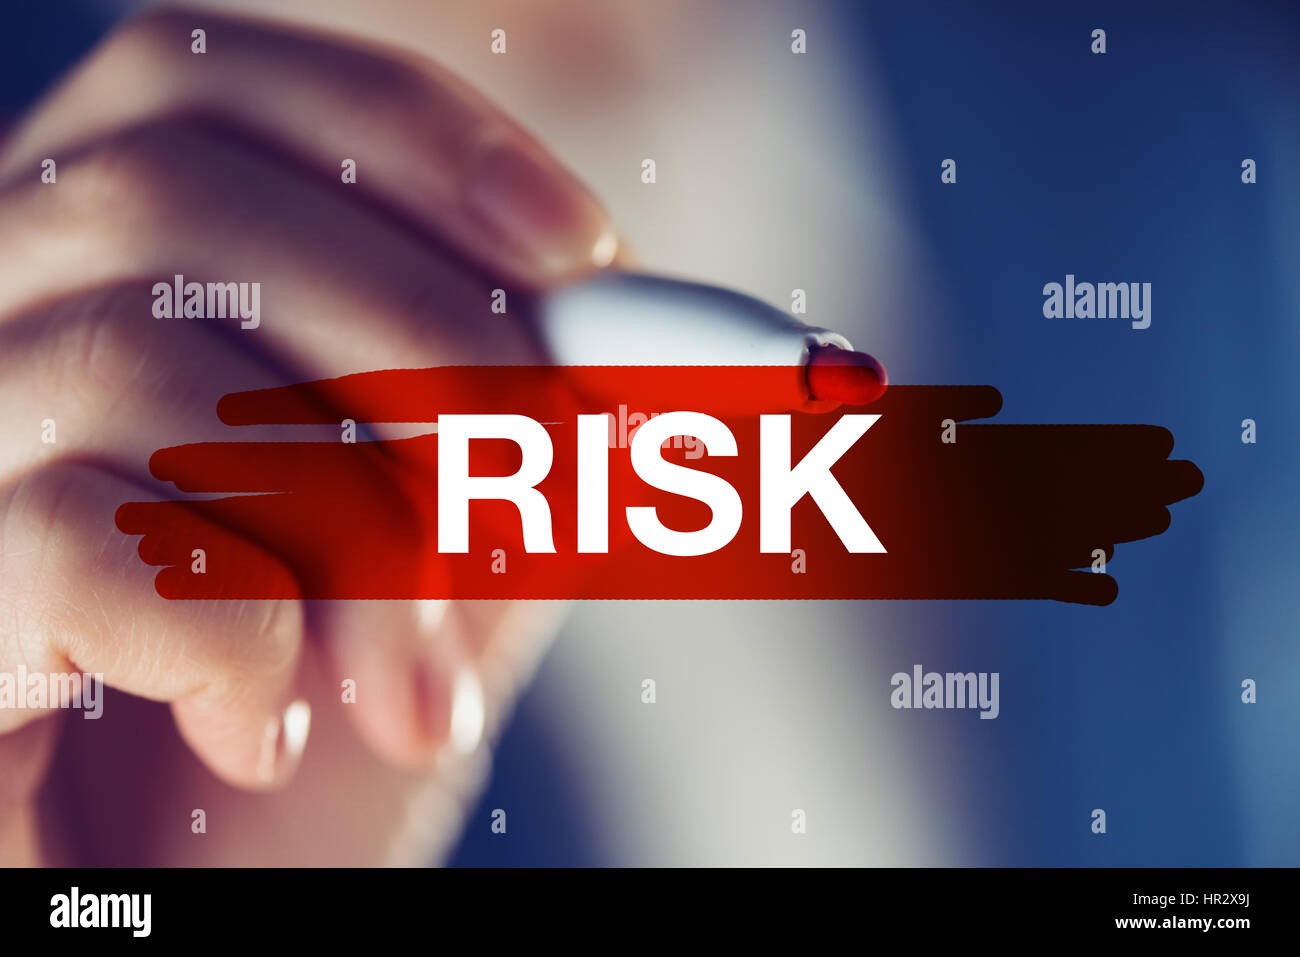 Risk in business concept, businesswoman marking the word with red highlighting marker pen Stock Photo